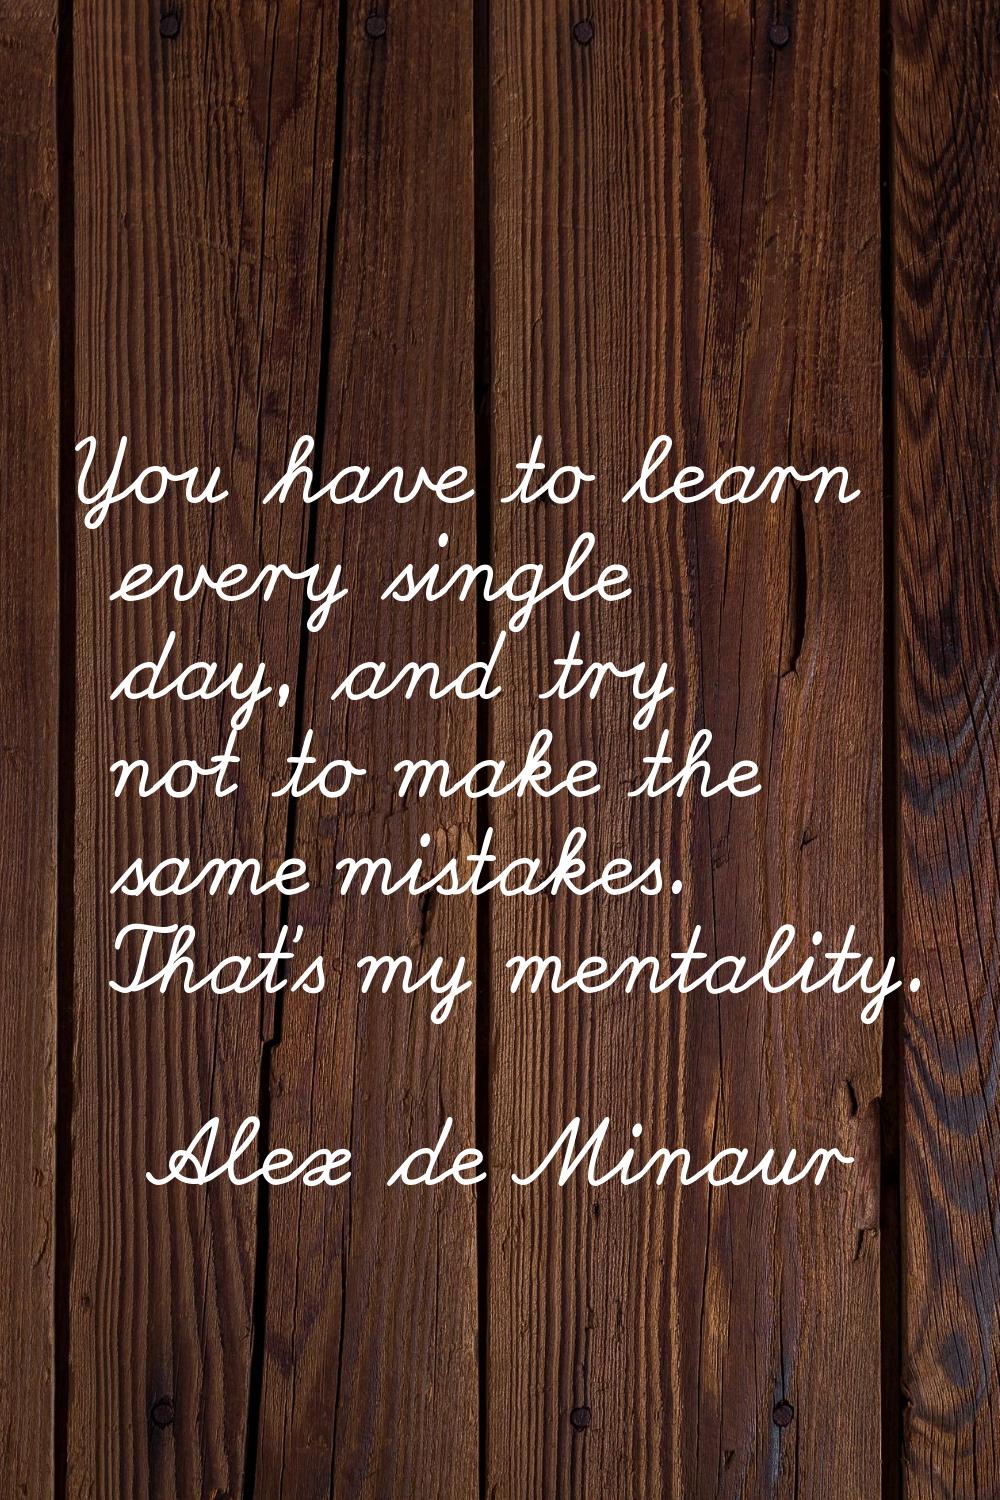 You have to learn every single day, and try not to make the same mistakes. That’s my mentality.